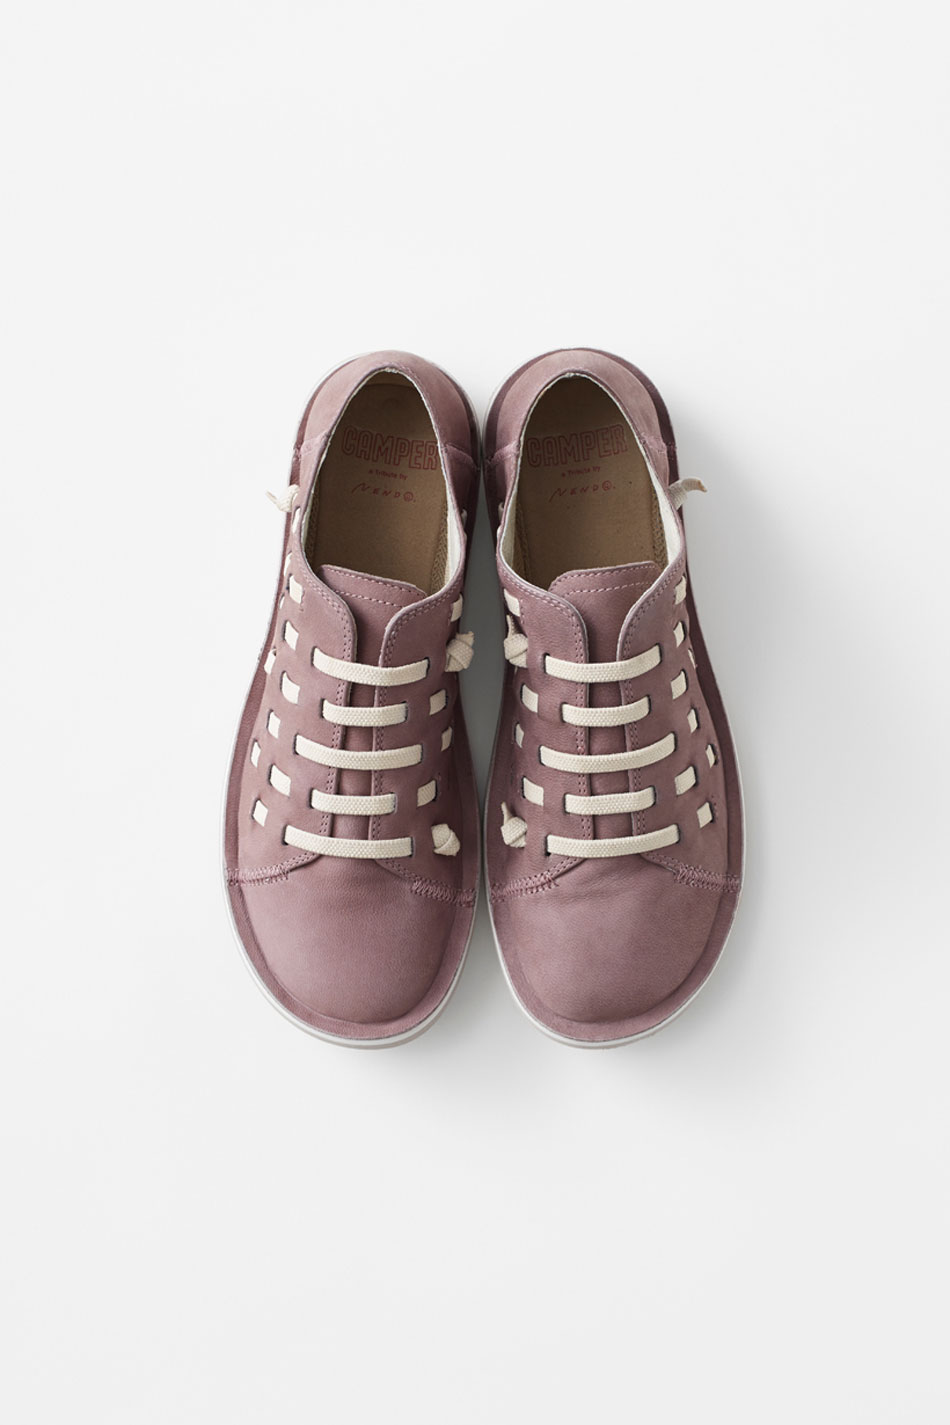 tribute by nendo reinterprets the camper beetle shoe with bold elastic ...